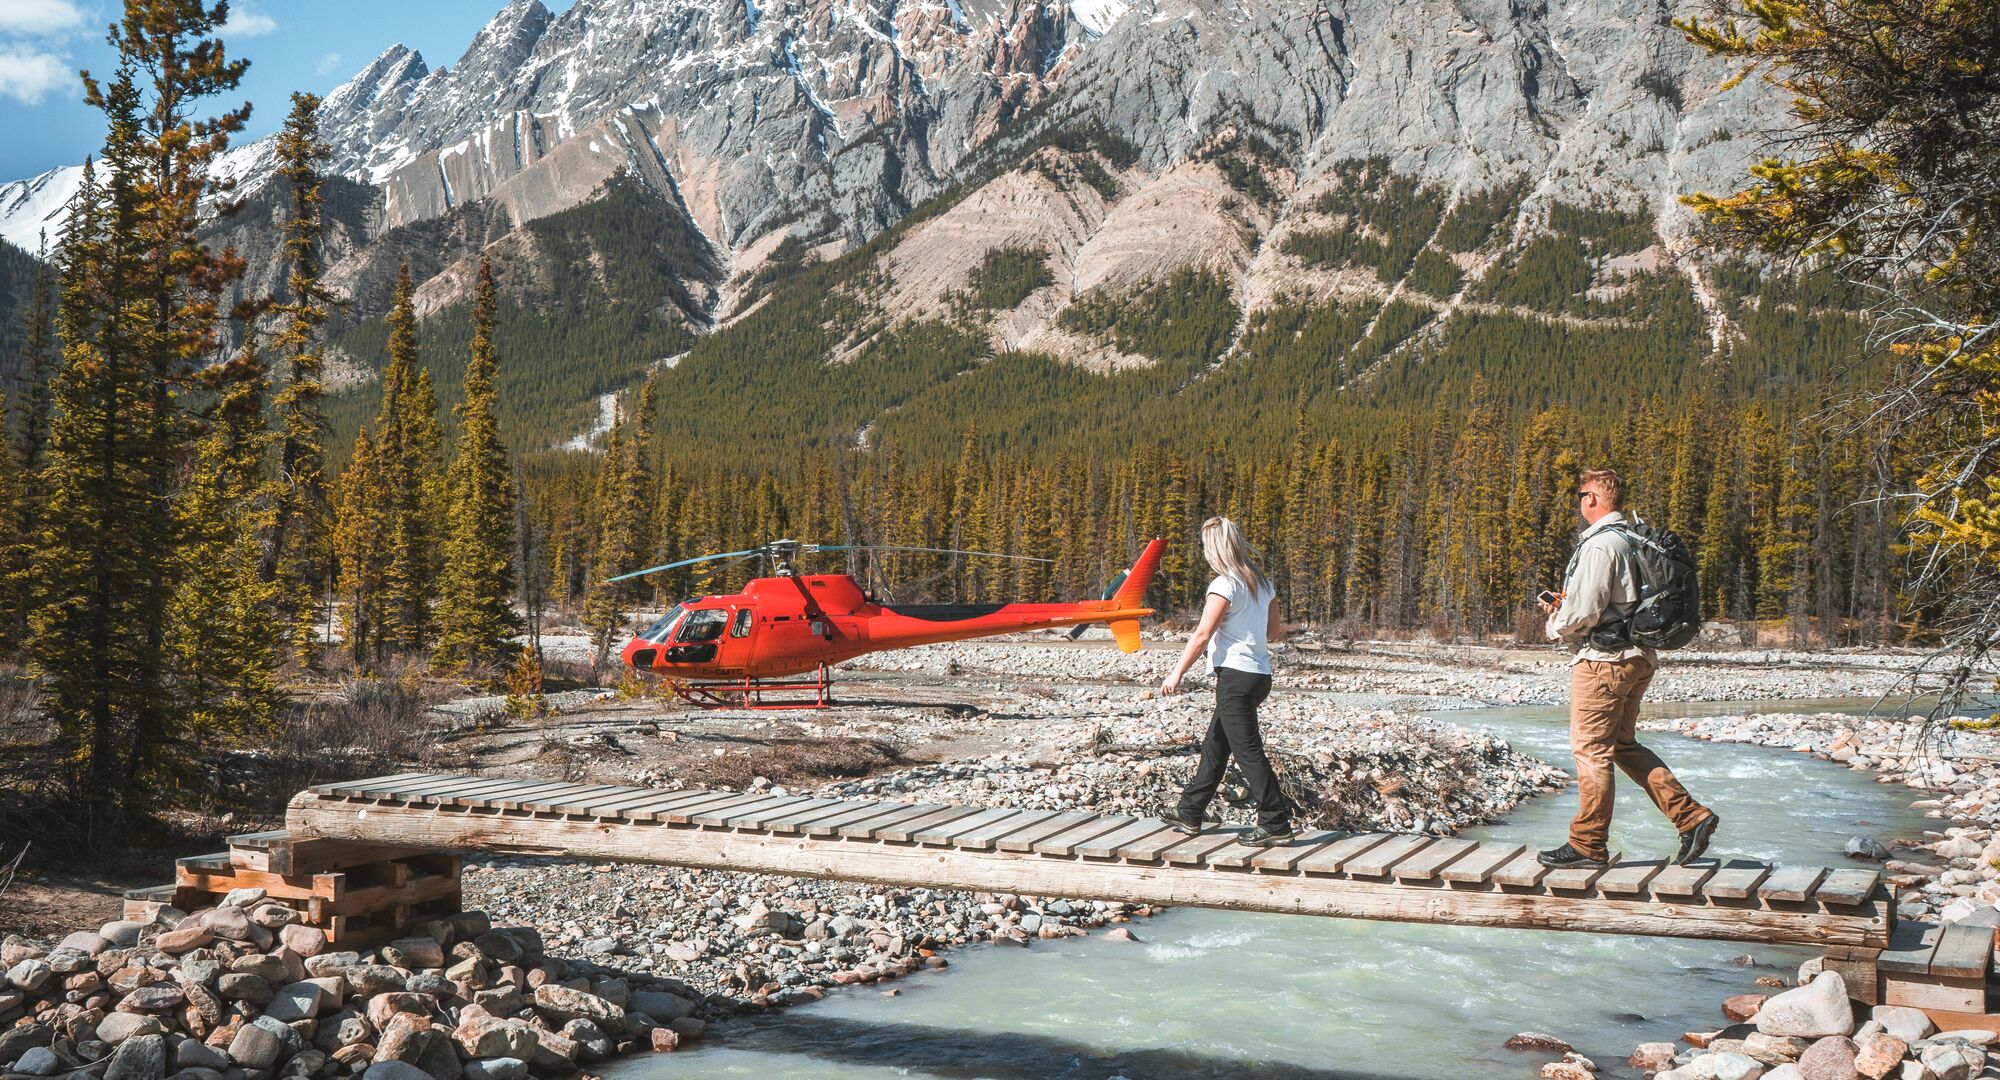 Two people crossing a bridge in front of a helicopter on a tour with Rockies Heli